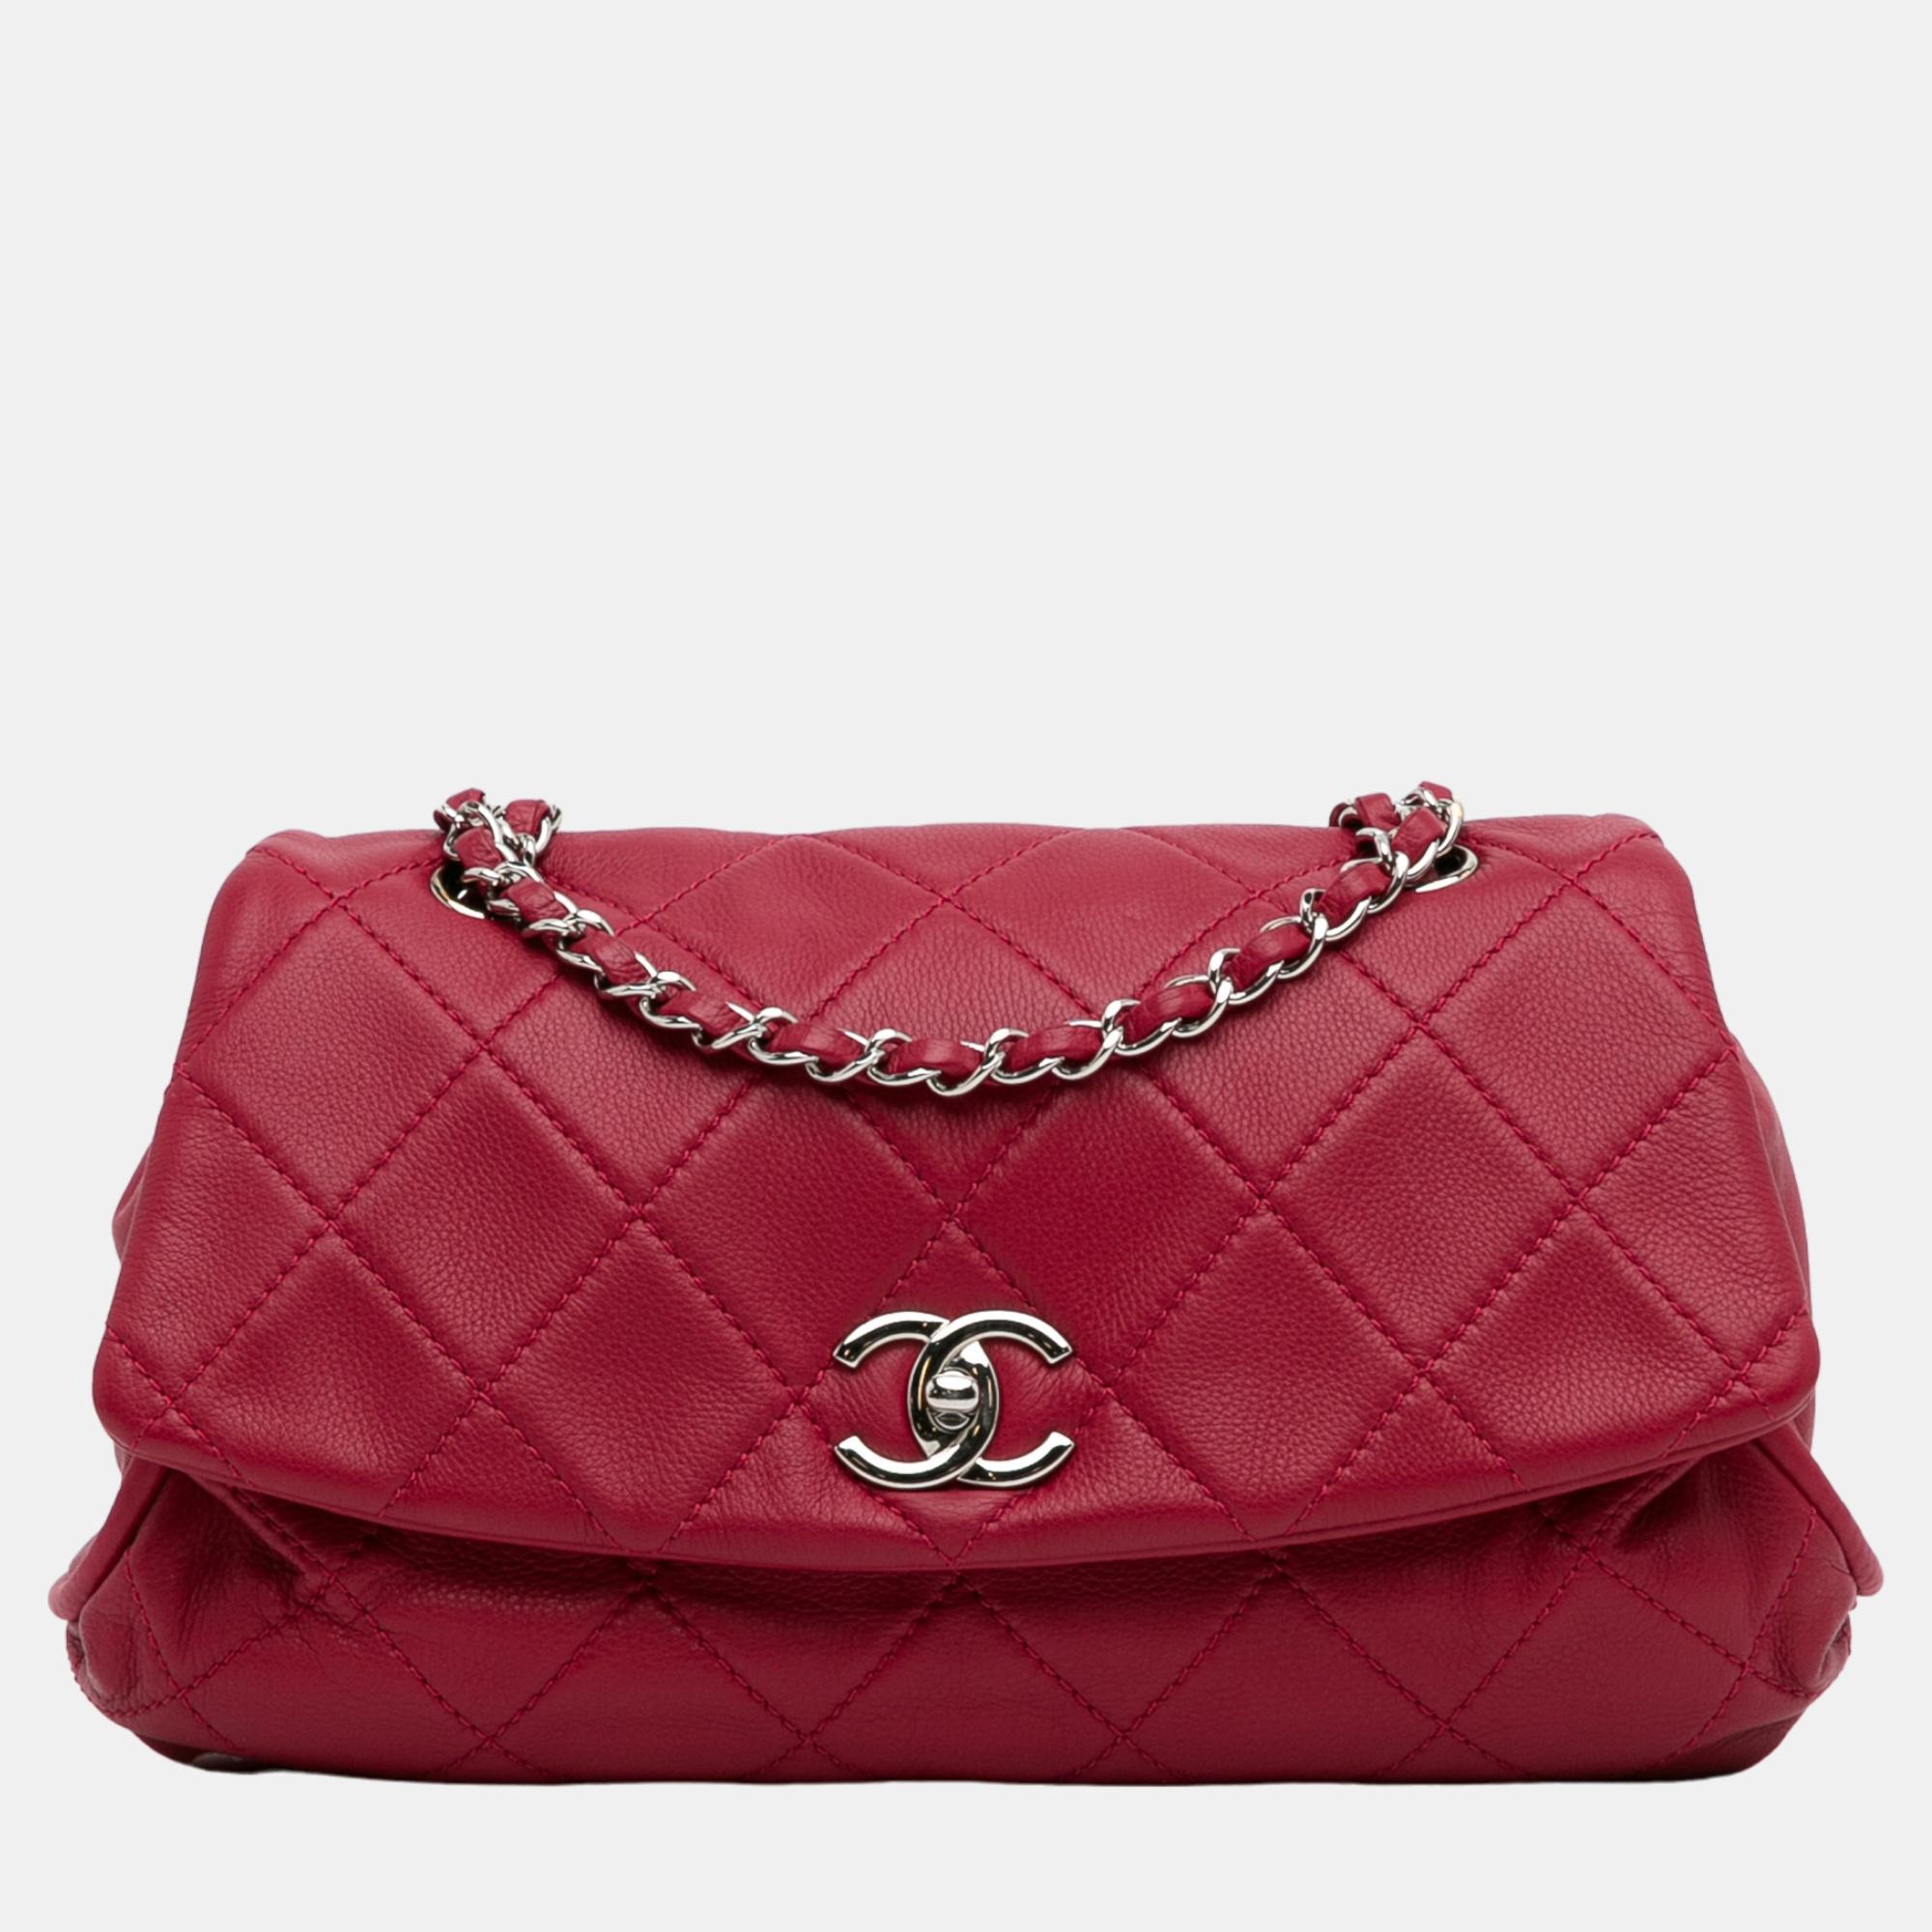 Chanel red quilted calfskin curvy flap